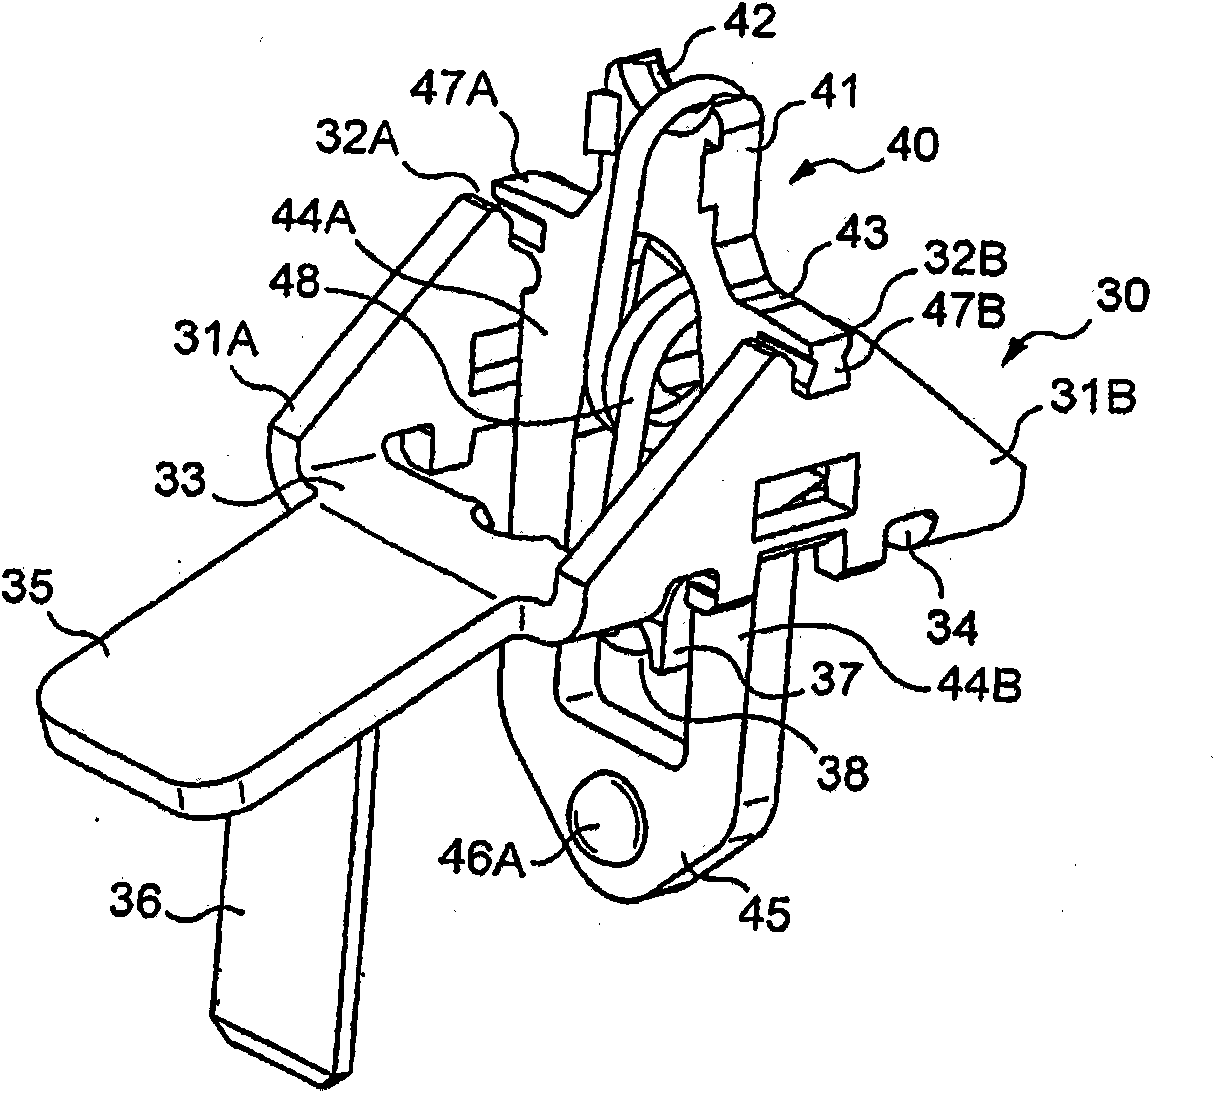 Electrical apparatus such as a switch